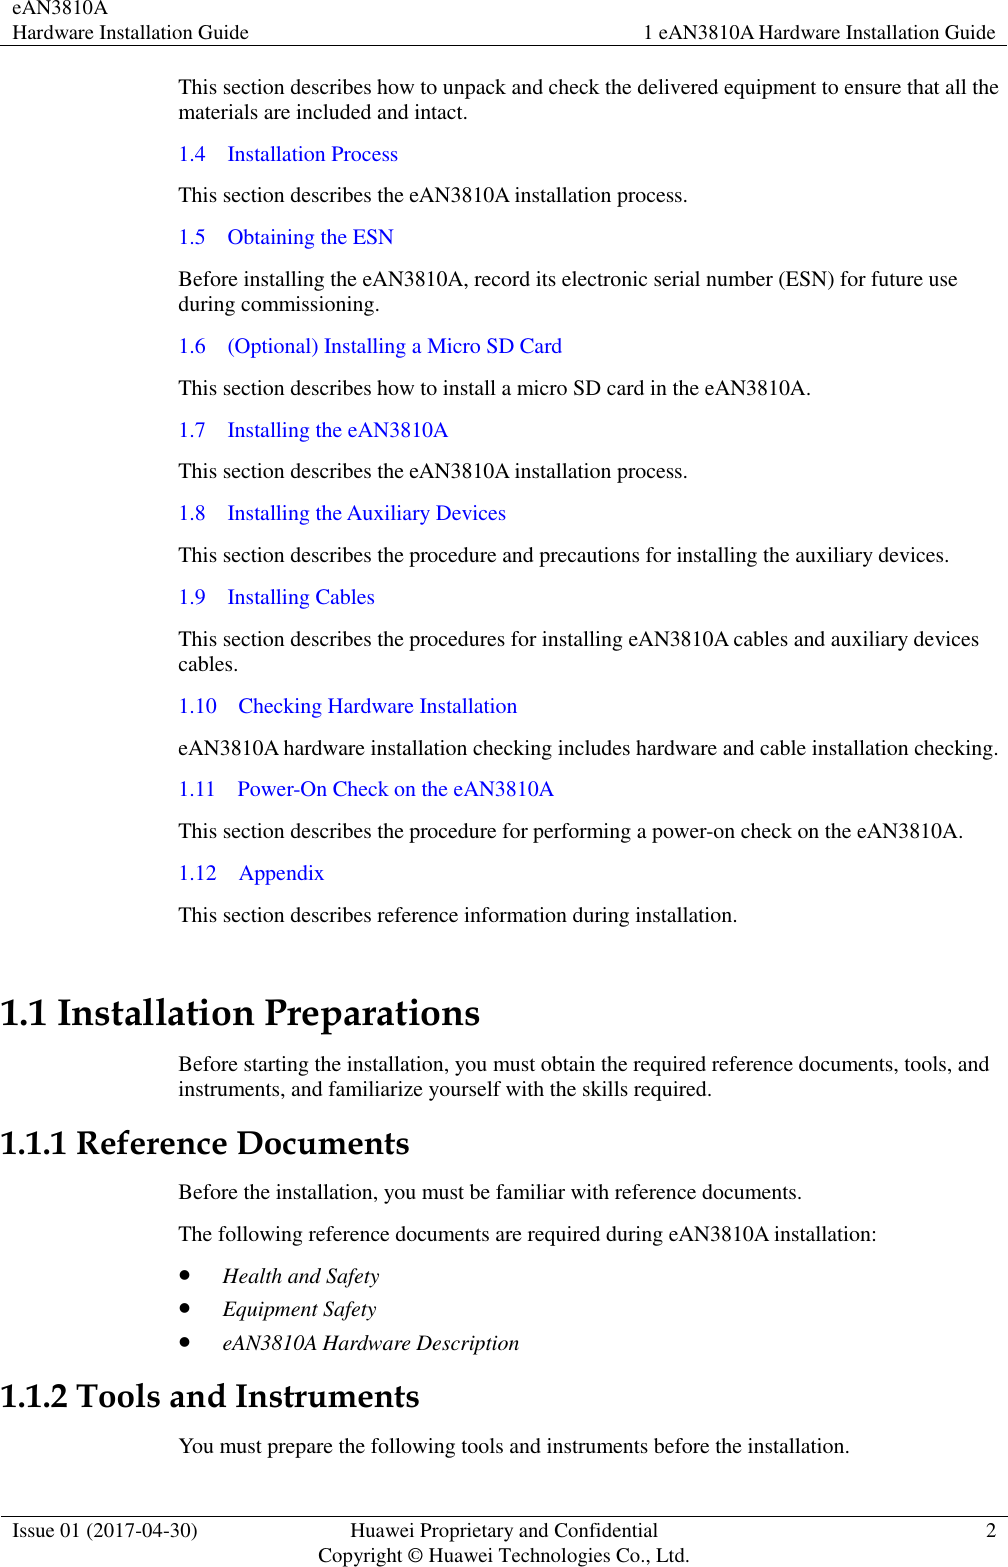 eAN3810A   Hardware Installation Guide 1 eAN3810A Hardware Installation Guide  Issue 01 (2017-04-30) Huawei Proprietary and Confidential                                     Copyright © Huawei Technologies Co., Ltd. 2  This section describes how to unpack and check the delivered equipment to ensure that all the materials are included and intact. 1.4    Installation Process This section describes the eAN3810A installation process.   1.5    Obtaining the ESN Before installing the eAN3810A, record its electronic serial number (ESN) for future use during commissioning. 1.6    (Optional) Installing a Micro SD Card This section describes how to install a micro SD card in the eAN3810A. 1.7    Installing the eAN3810A This section describes the eAN3810A installation process. 1.8    Installing the Auxiliary Devices This section describes the procedure and precautions for installing the auxiliary devices. 1.9    Installing Cables This section describes the procedures for installing eAN3810A cables and auxiliary devices cables. 1.10    Checking Hardware Installation eAN3810A hardware installation checking includes hardware and cable installation checking.   1.11    Power-On Check on the eAN3810A This section describes the procedure for performing a power-on check on the eAN3810A. 1.12    Appendix This section describes reference information during installation.   1.1 Installation Preparations Before starting the installation, you must obtain the required reference documents, tools, and instruments, and familiarize yourself with the skills required. 1.1.1 Reference Documents Before the installation, you must be familiar with reference documents. The following reference documents are required during eAN3810A installation:  Health and Safety  Equipment Safety  eAN3810A Hardware Description 1.1.2 Tools and Instruments You must prepare the following tools and instruments before the installation. 